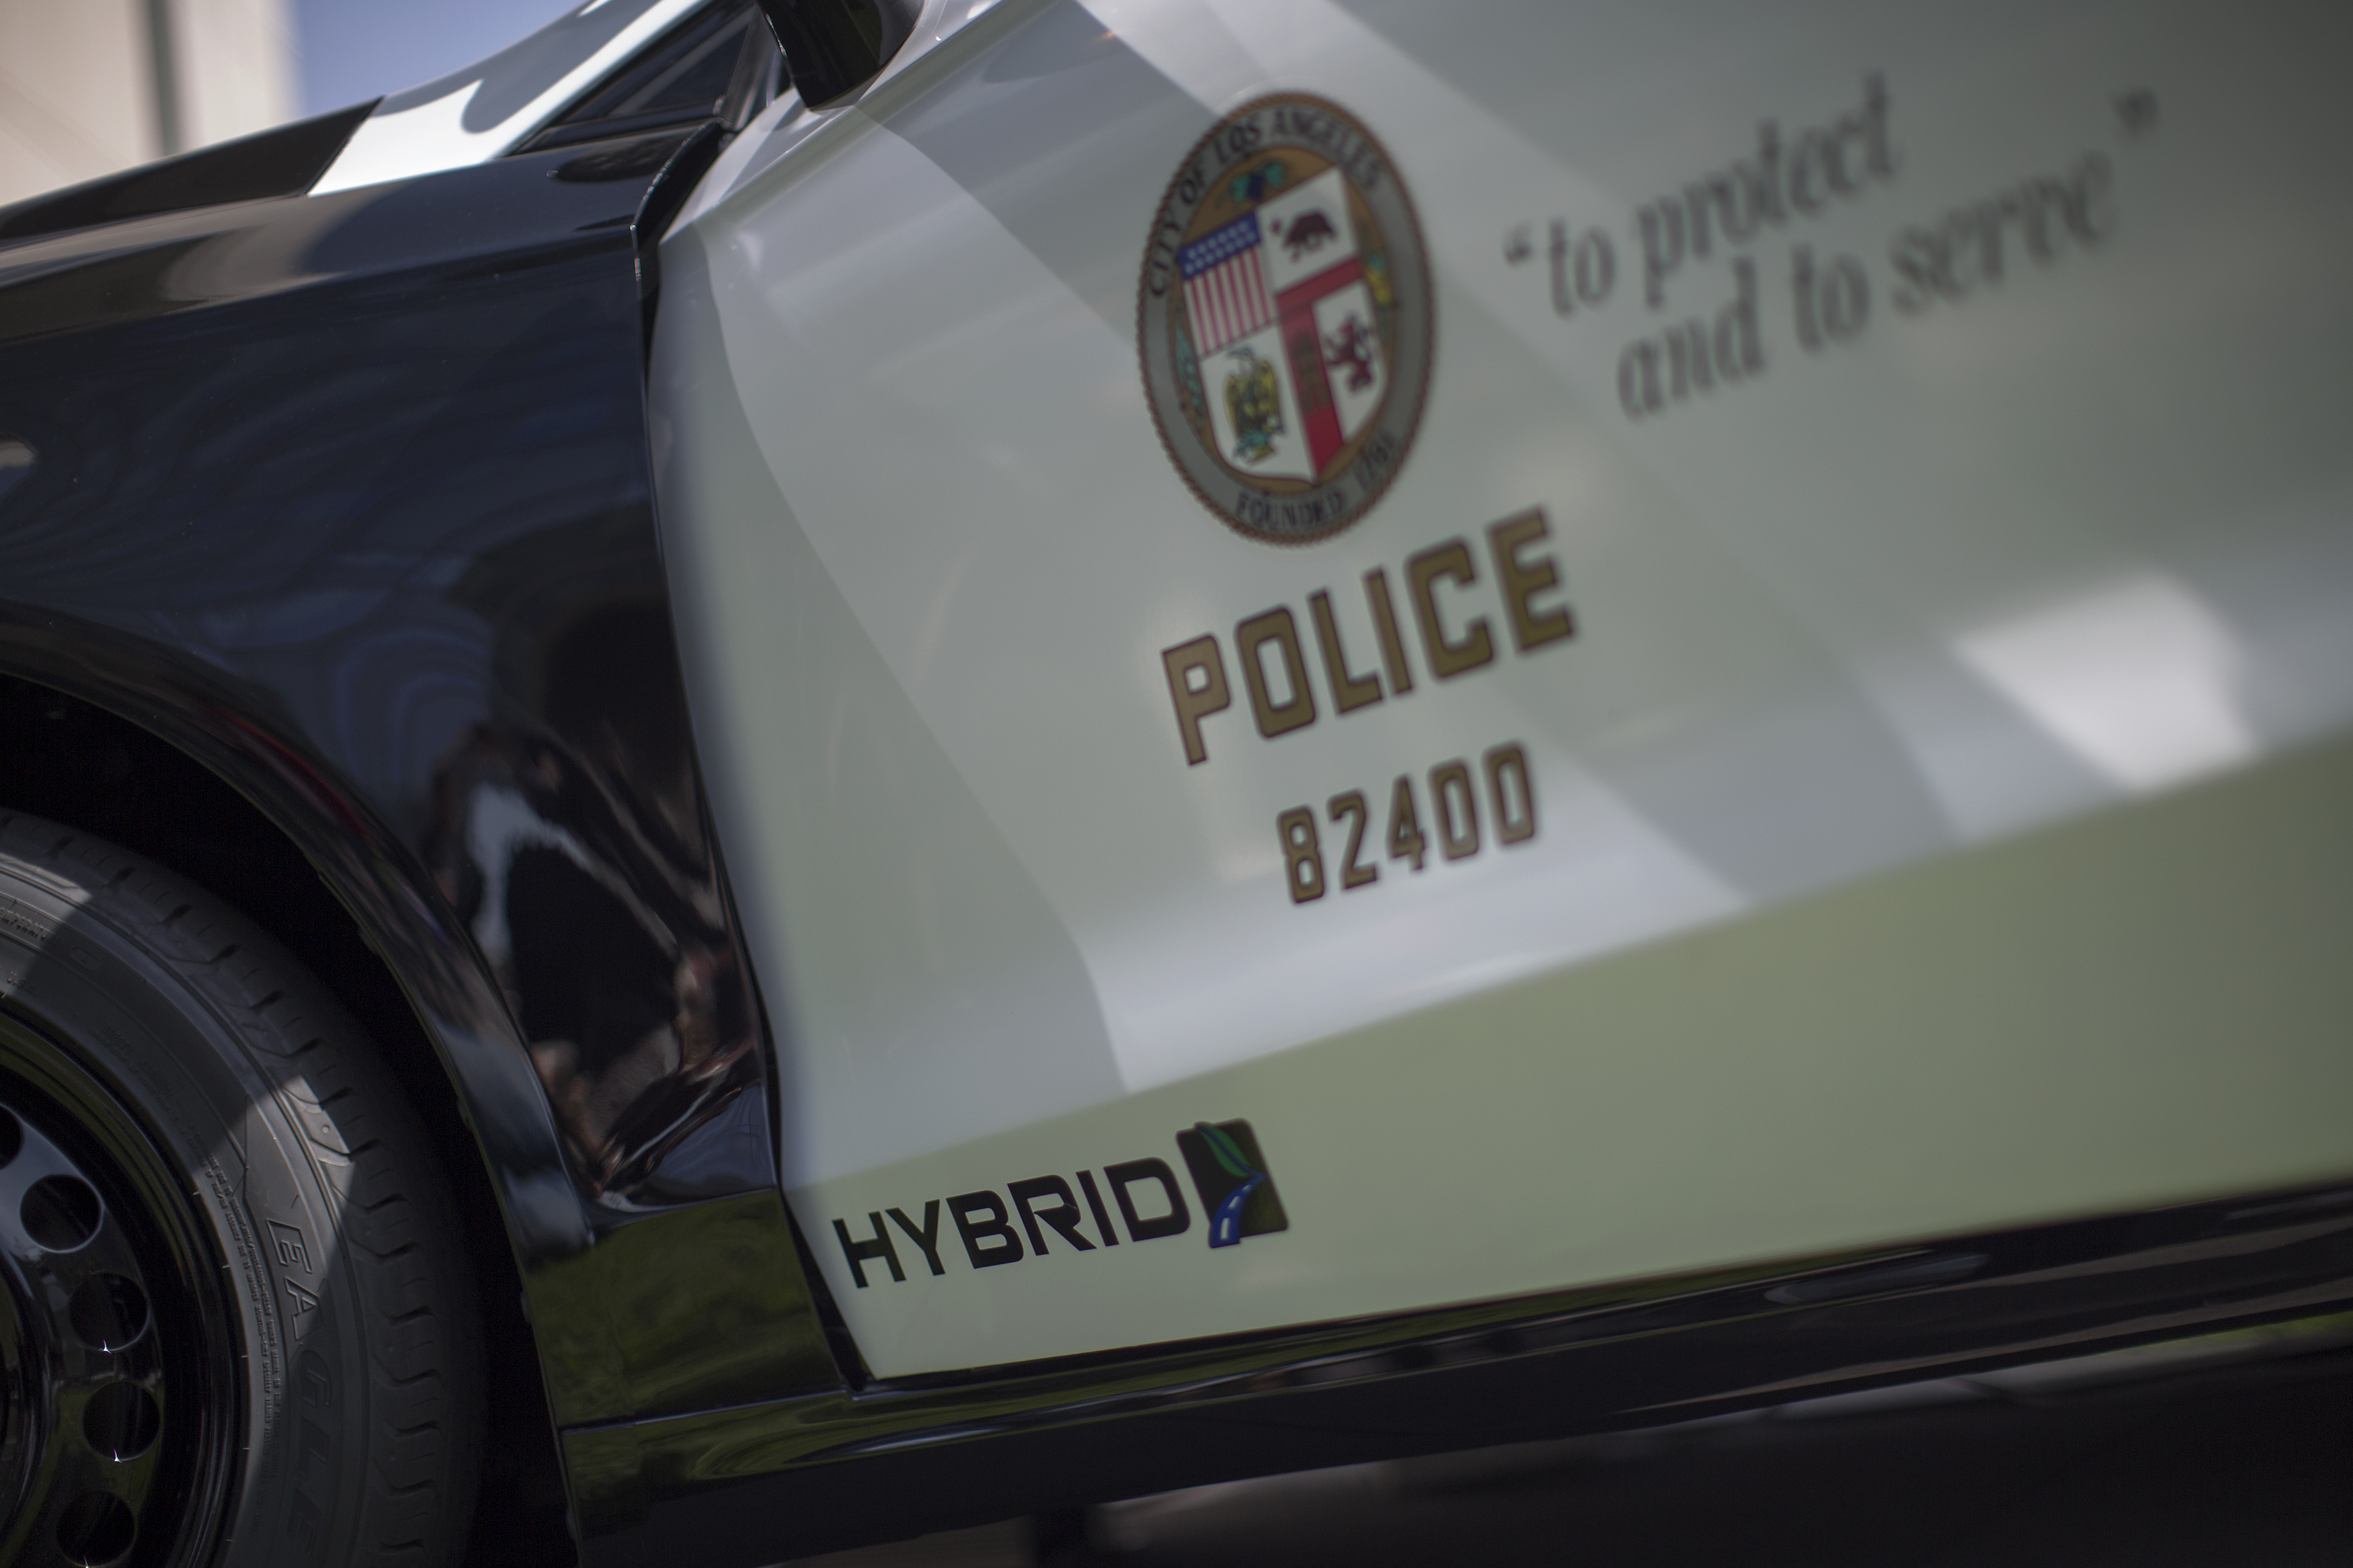 LOS ANGELES, CA – APRIL 10: Hybrid police car at the presentation of two new Ford Fusion hybrid pursuit vehicles at Los Angeles Police Department Headquarters on April 10, 2017 in Los Angeles, California.  The Los Angeles Police Department intends to purchase at least 300 hybrid and hybrid-electric vehicles by 2020.  (Photo by David McNew/Getty Images)